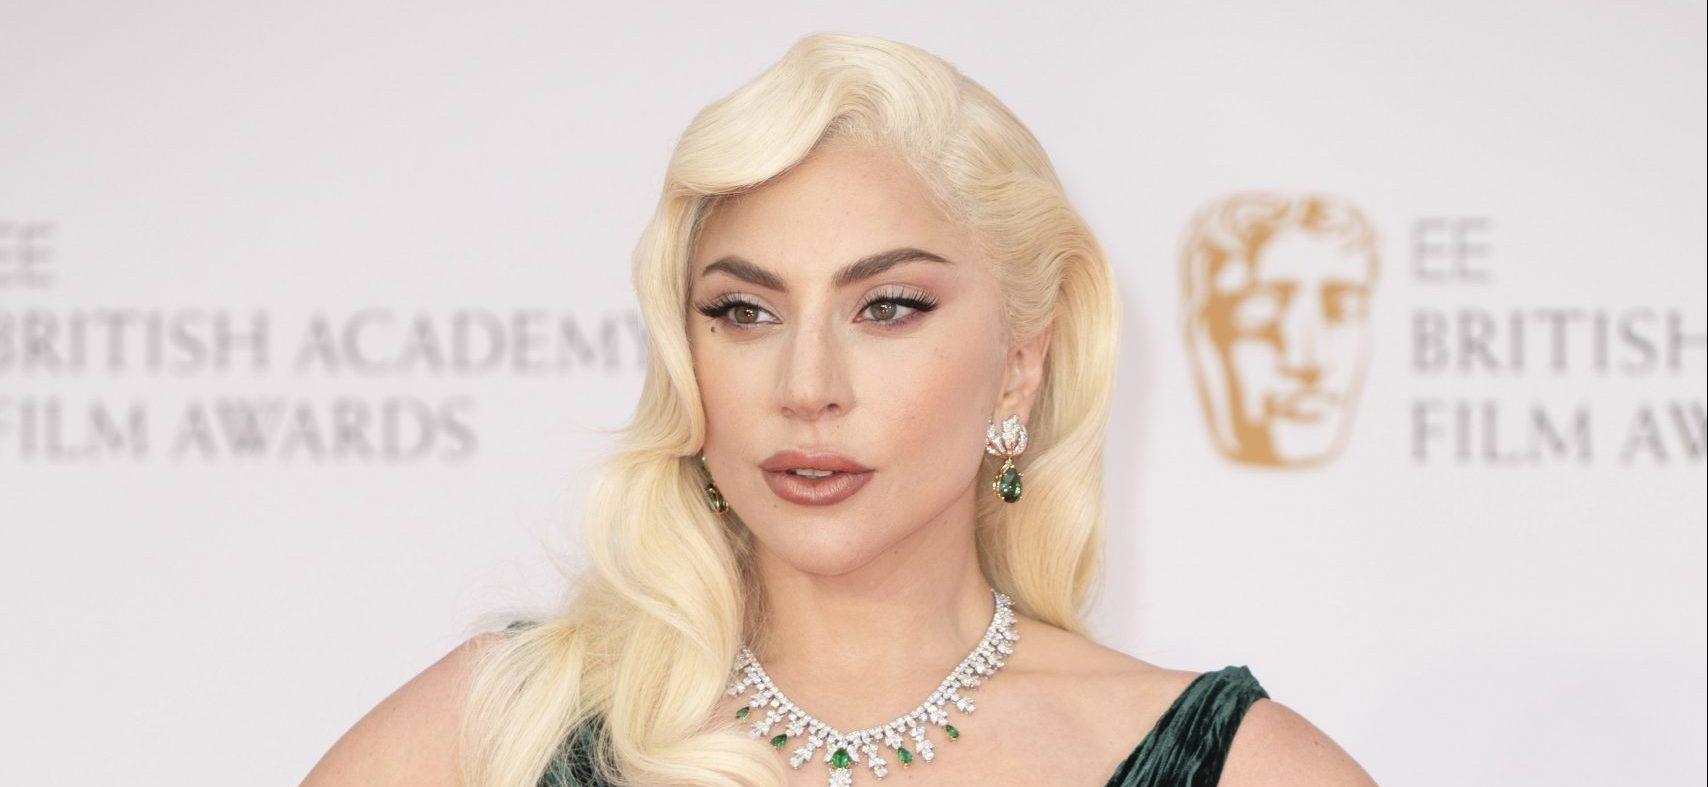 Lawsuit Against Lady Gaga Over $500,000 Reward For Her Dogs Gets Tossed